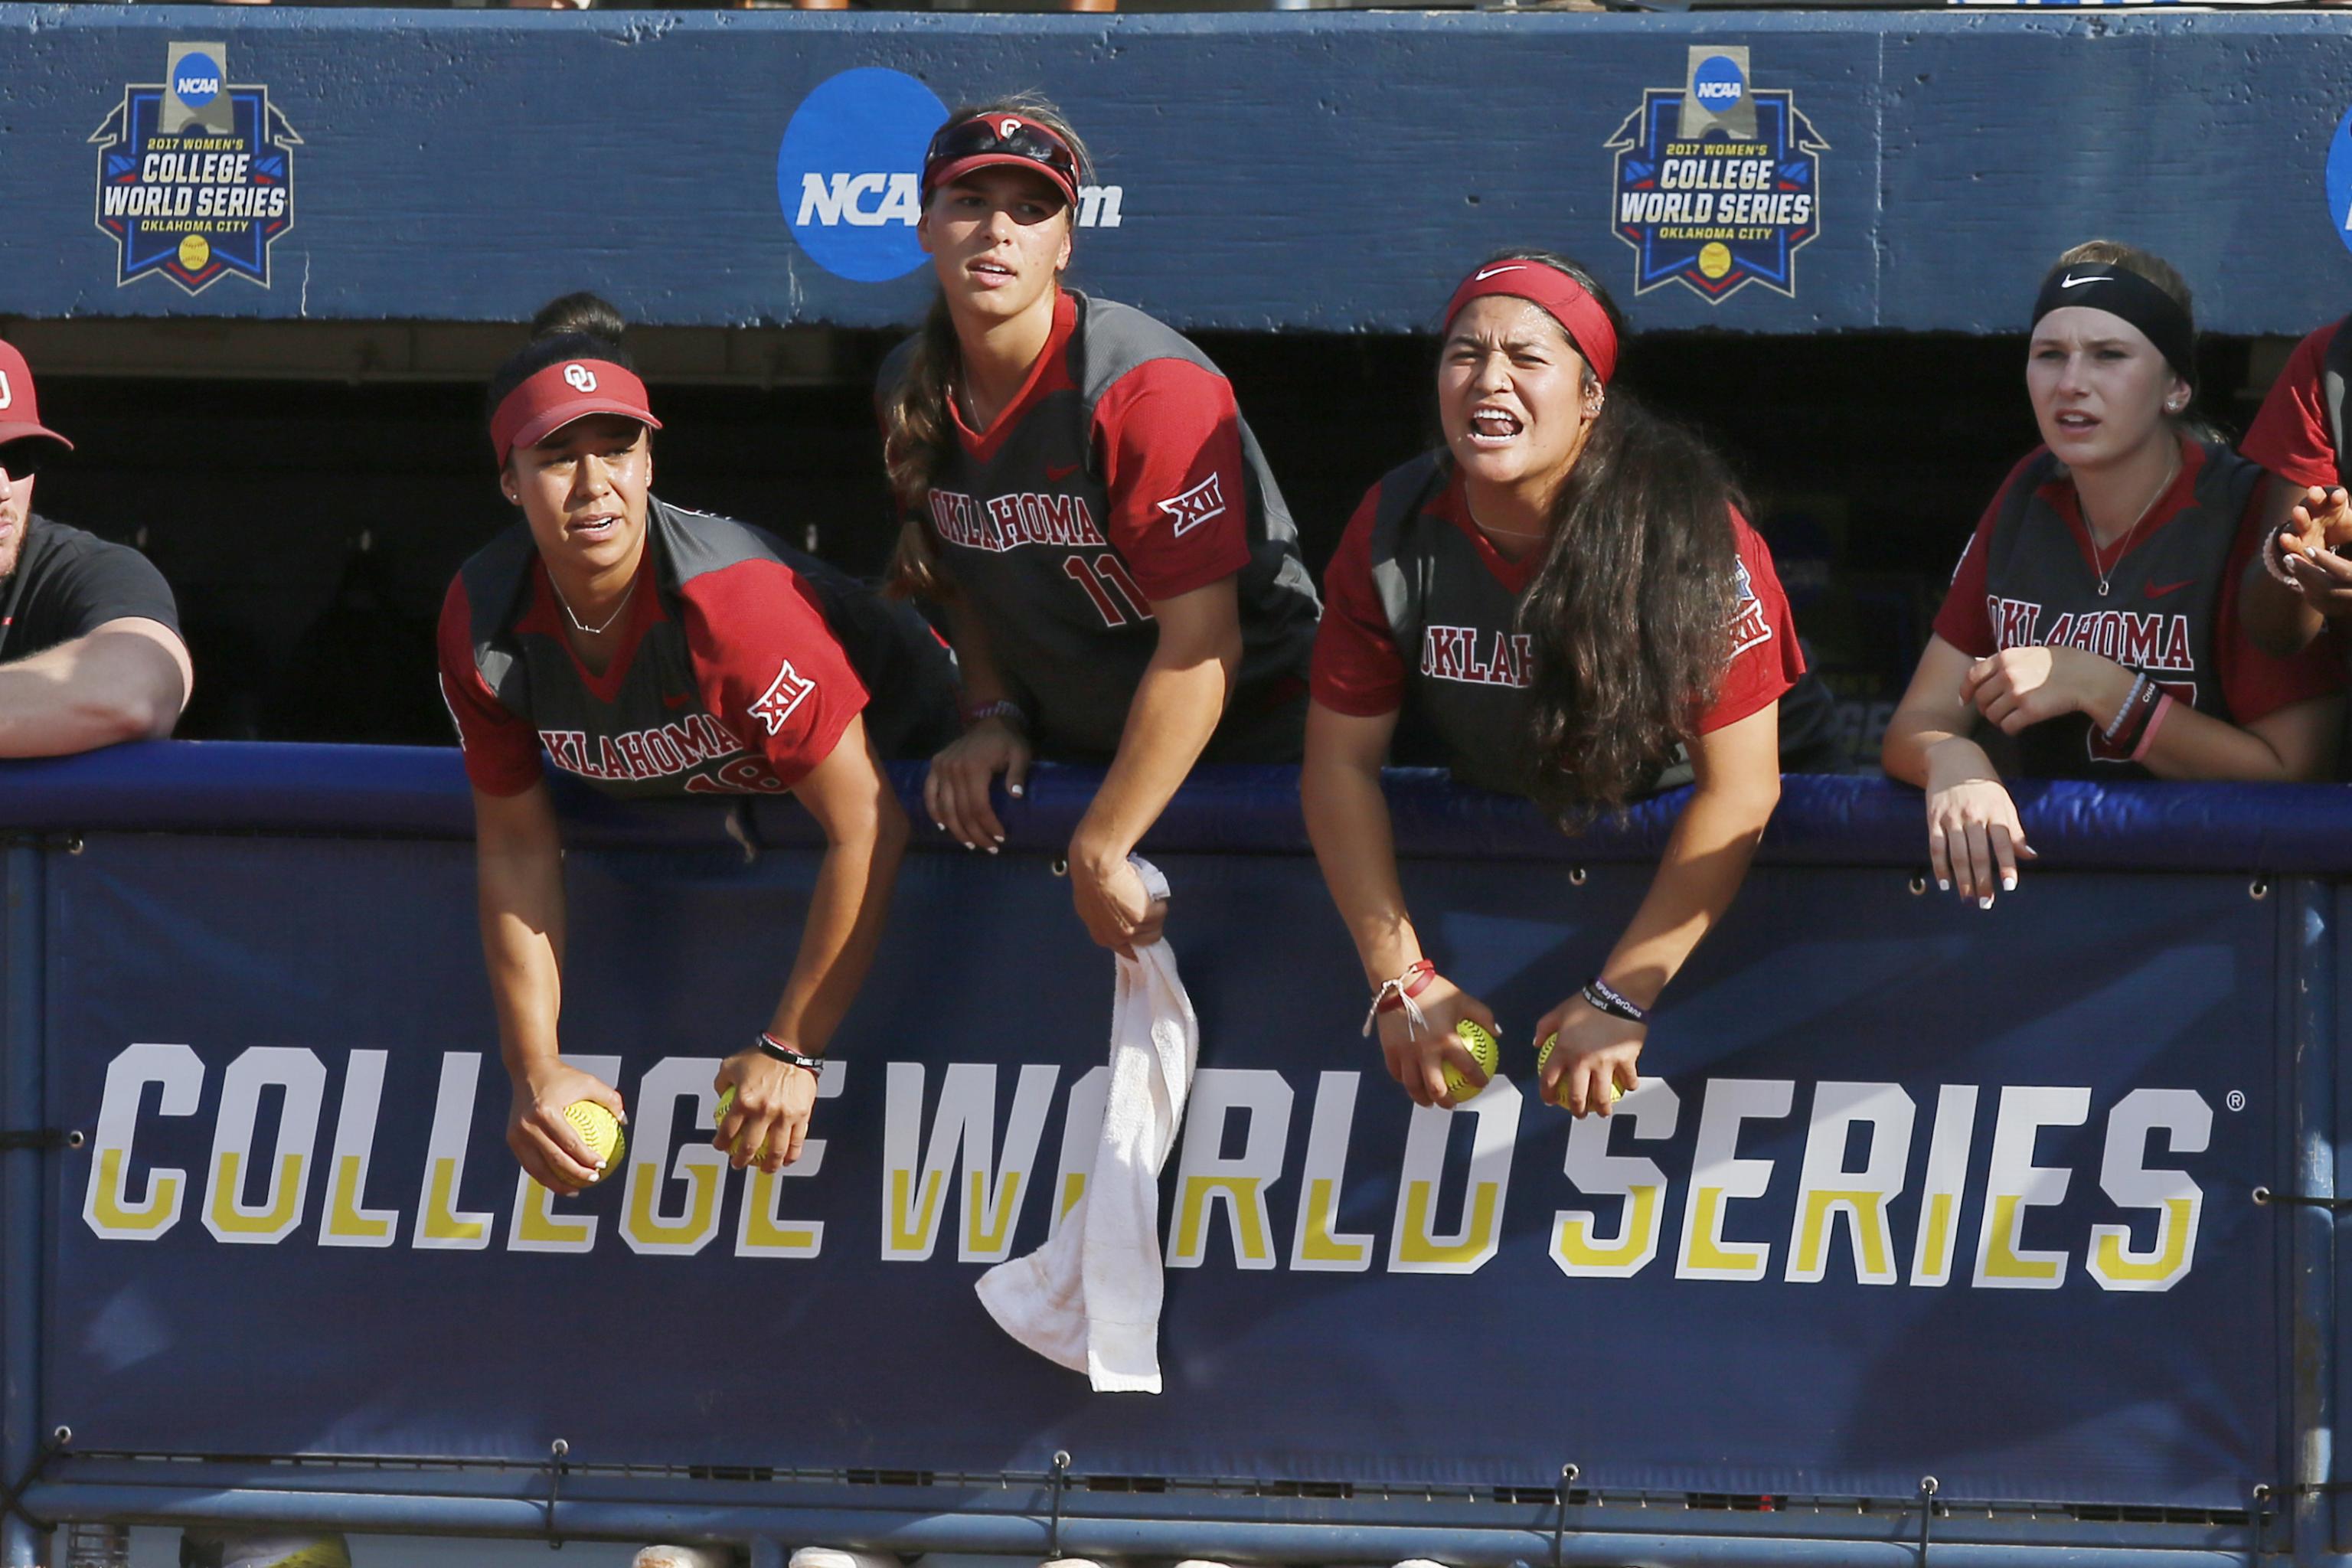 Oklahoma Beats Florida in Game 1 of College Softball World Series in 17